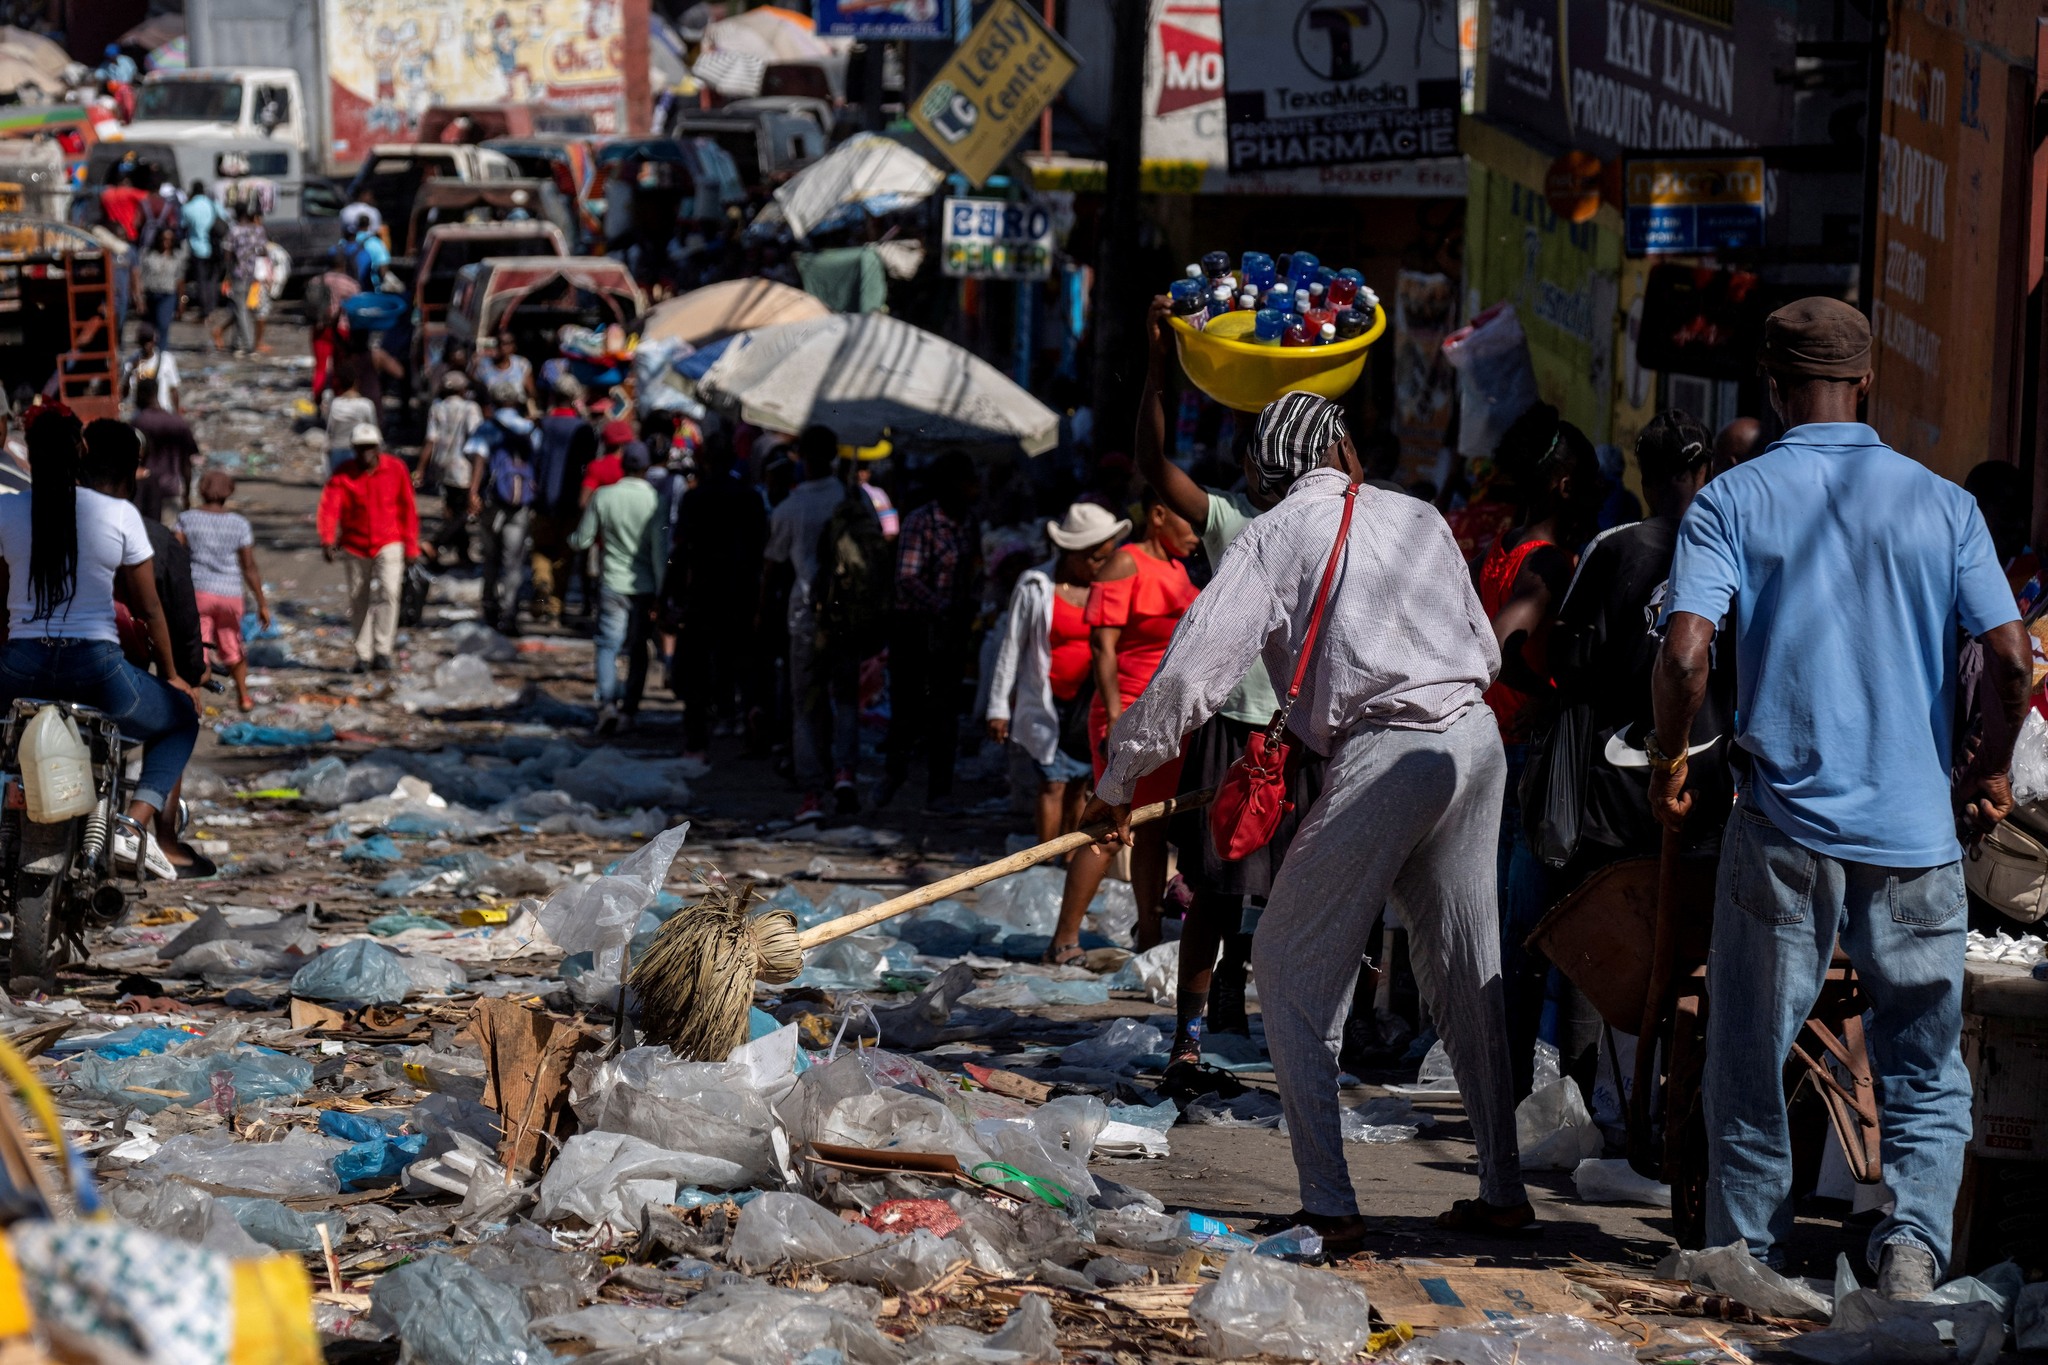 FILE PHOTO: A woman sweeps trash from the sidewalk to the street days after Haiti police blocked streets and broke into the airport during a protest demanding justice for fellow police officers killed by armed gangs, in Port-au-Prince, Haiti February 1,2023. REUTERS/Ricardo Arduengo/File Photo